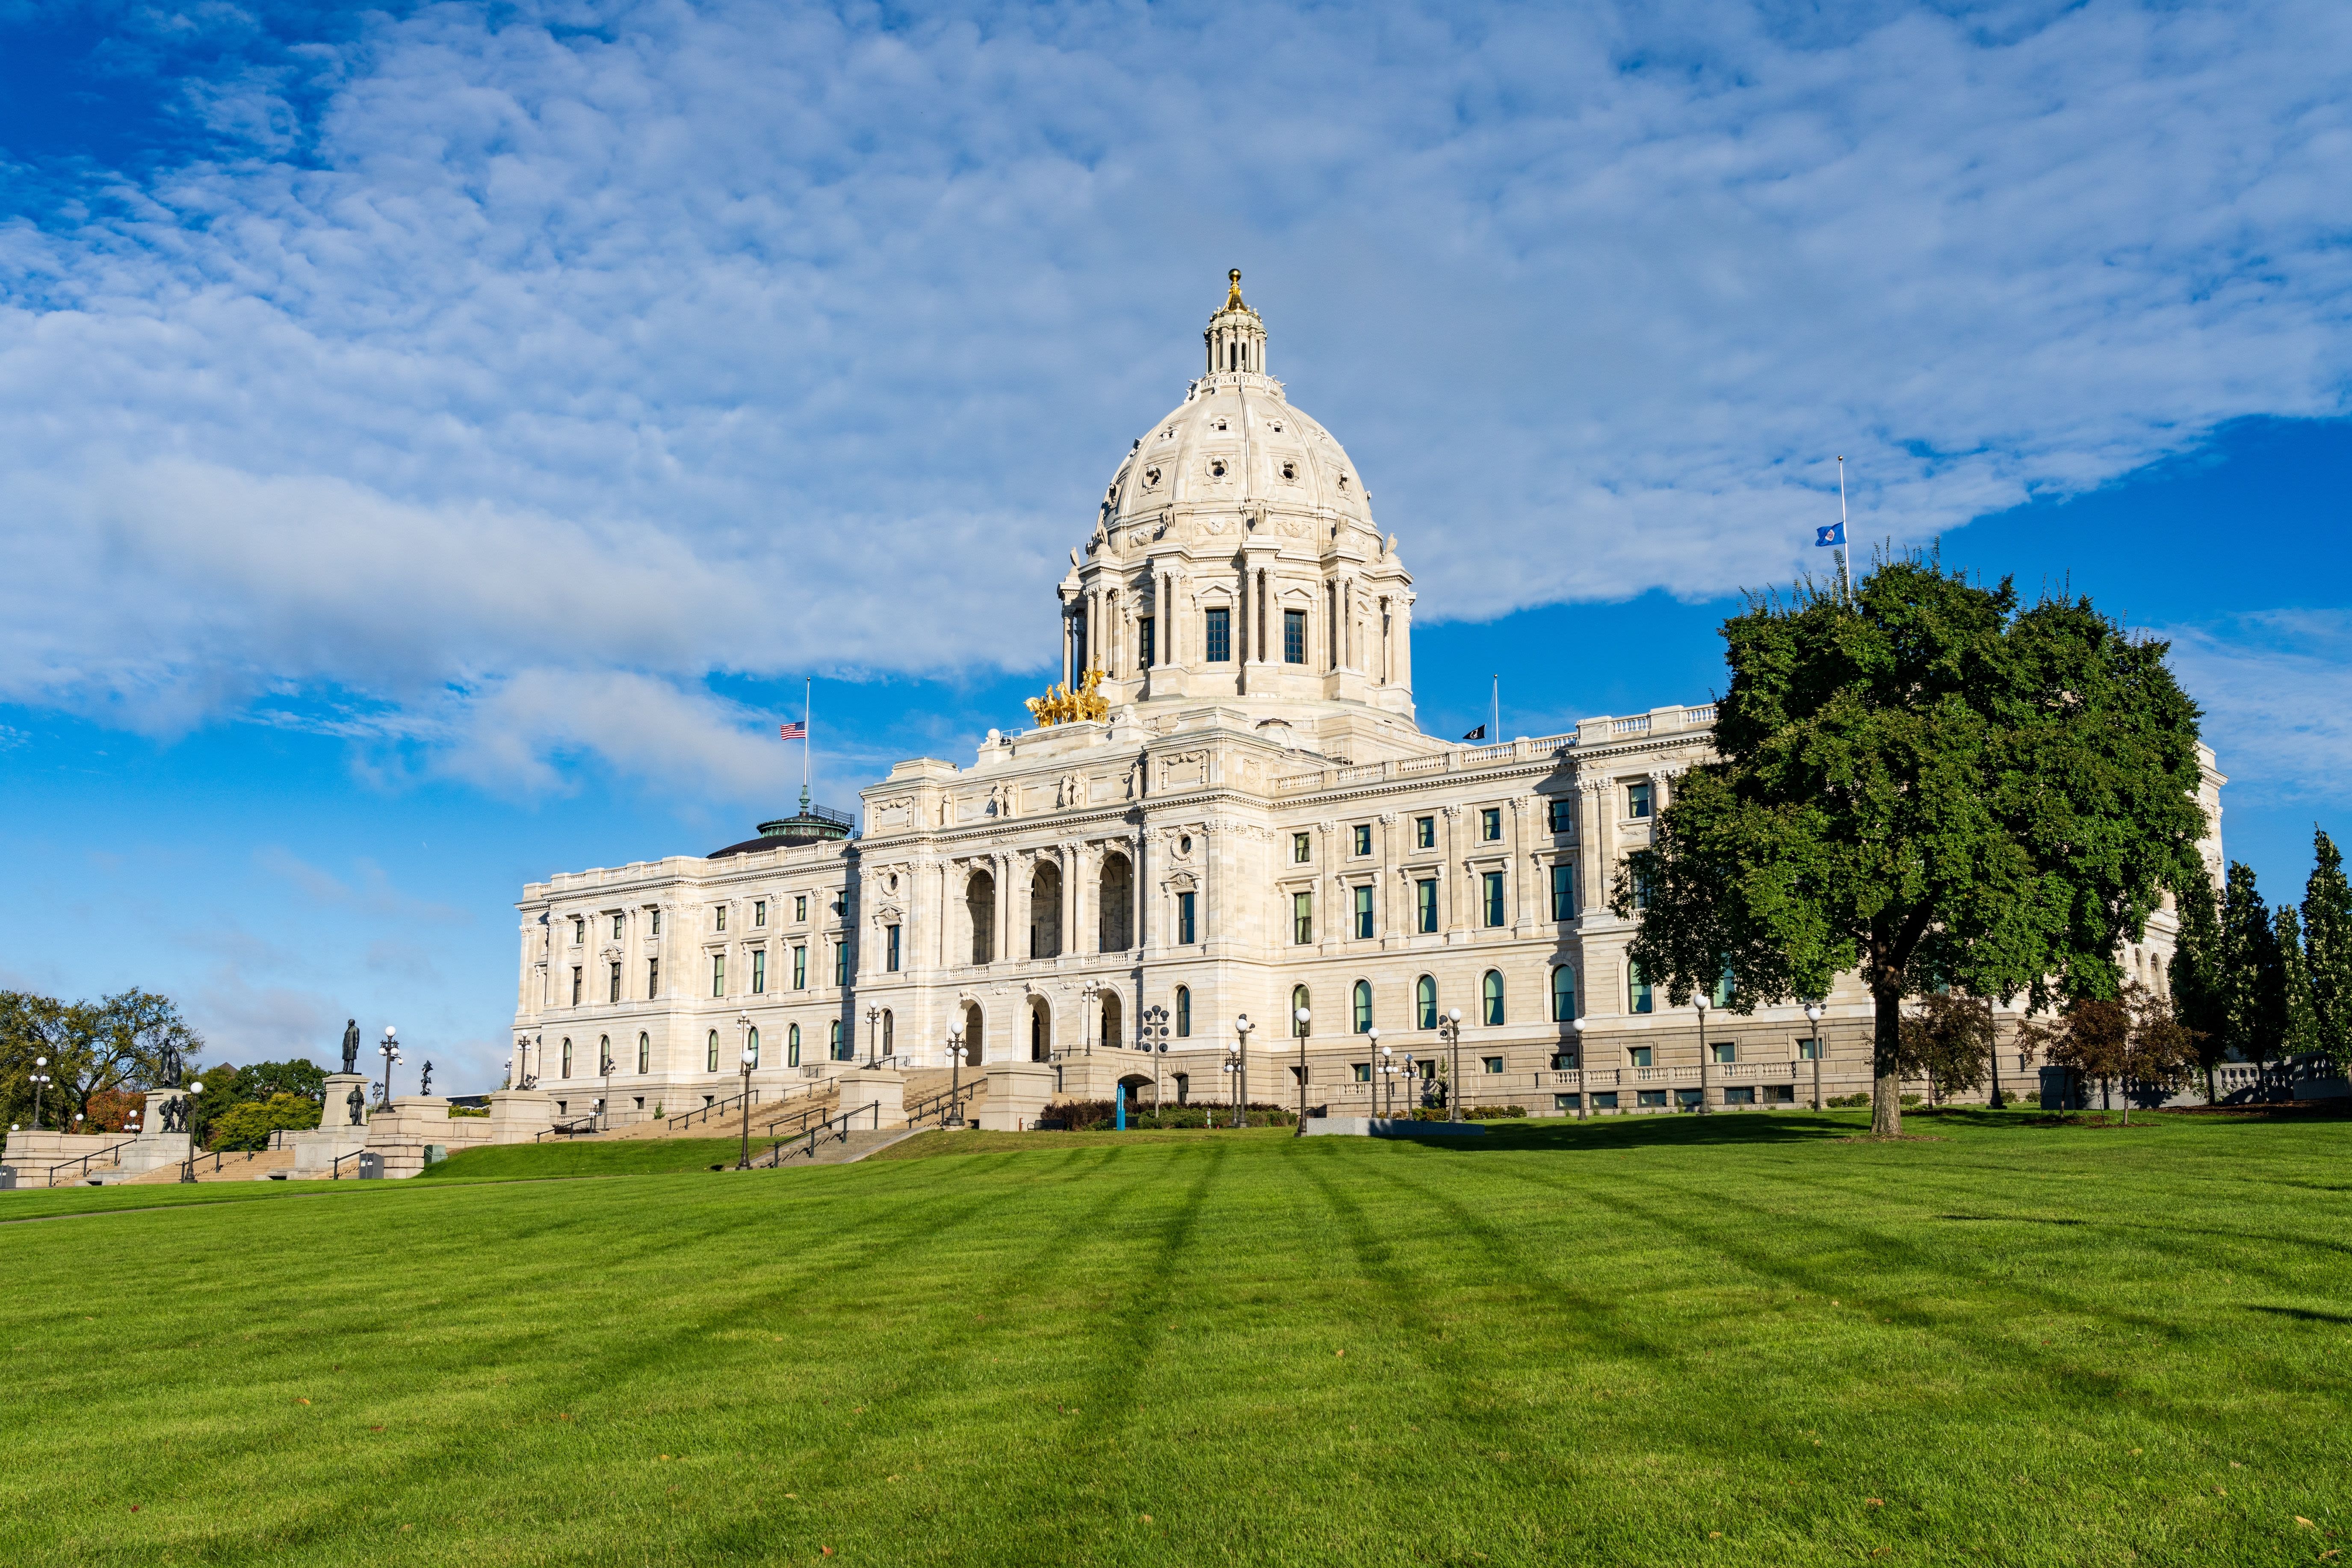 ‘Equal Rights Amendment’ to expand abortion fails in Minnesota